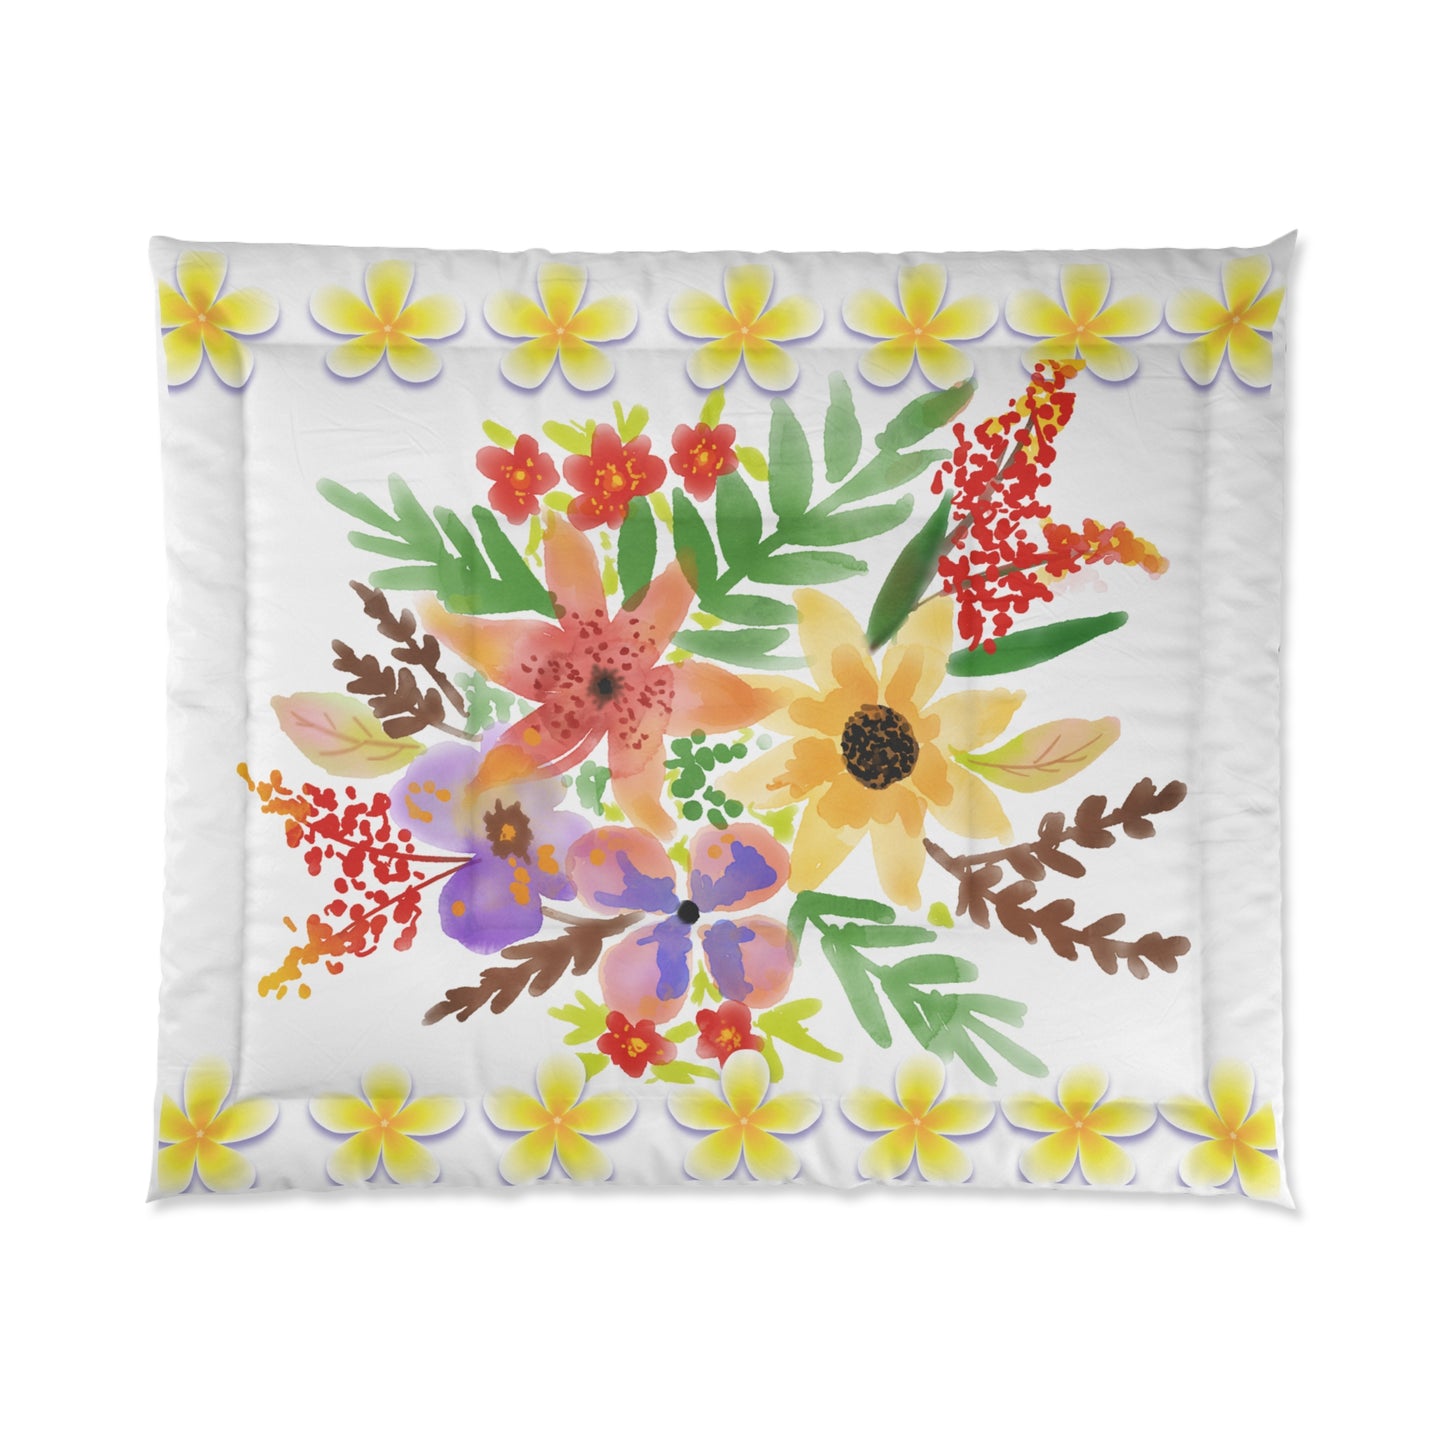 The Ultimate Doona Blanket Comforter - with Flower and frangipani edges